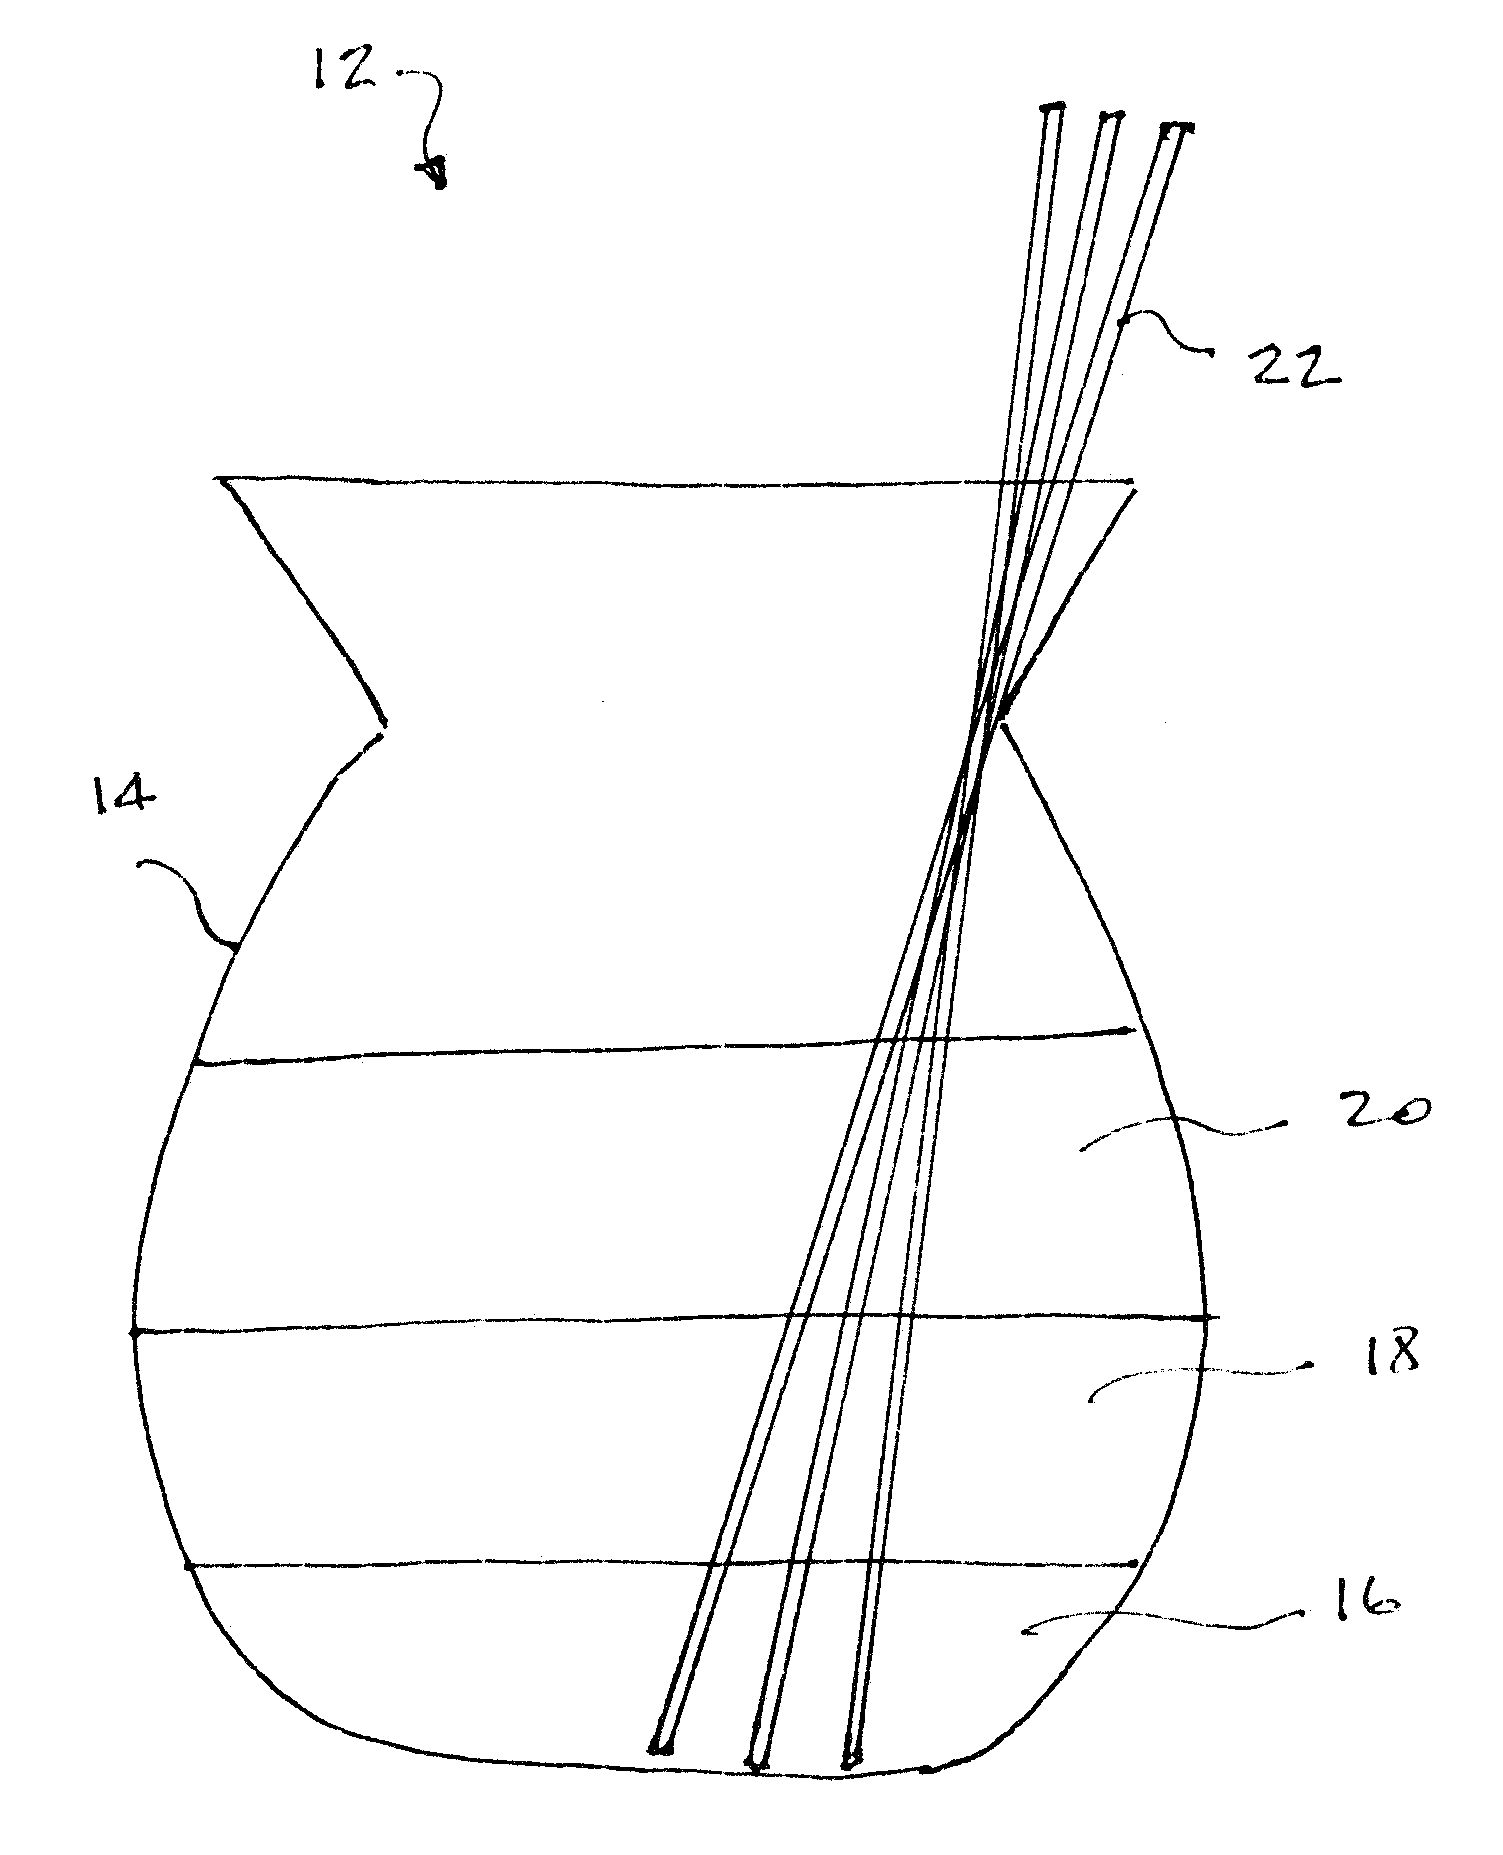 Multi-layer fragrance delivery system